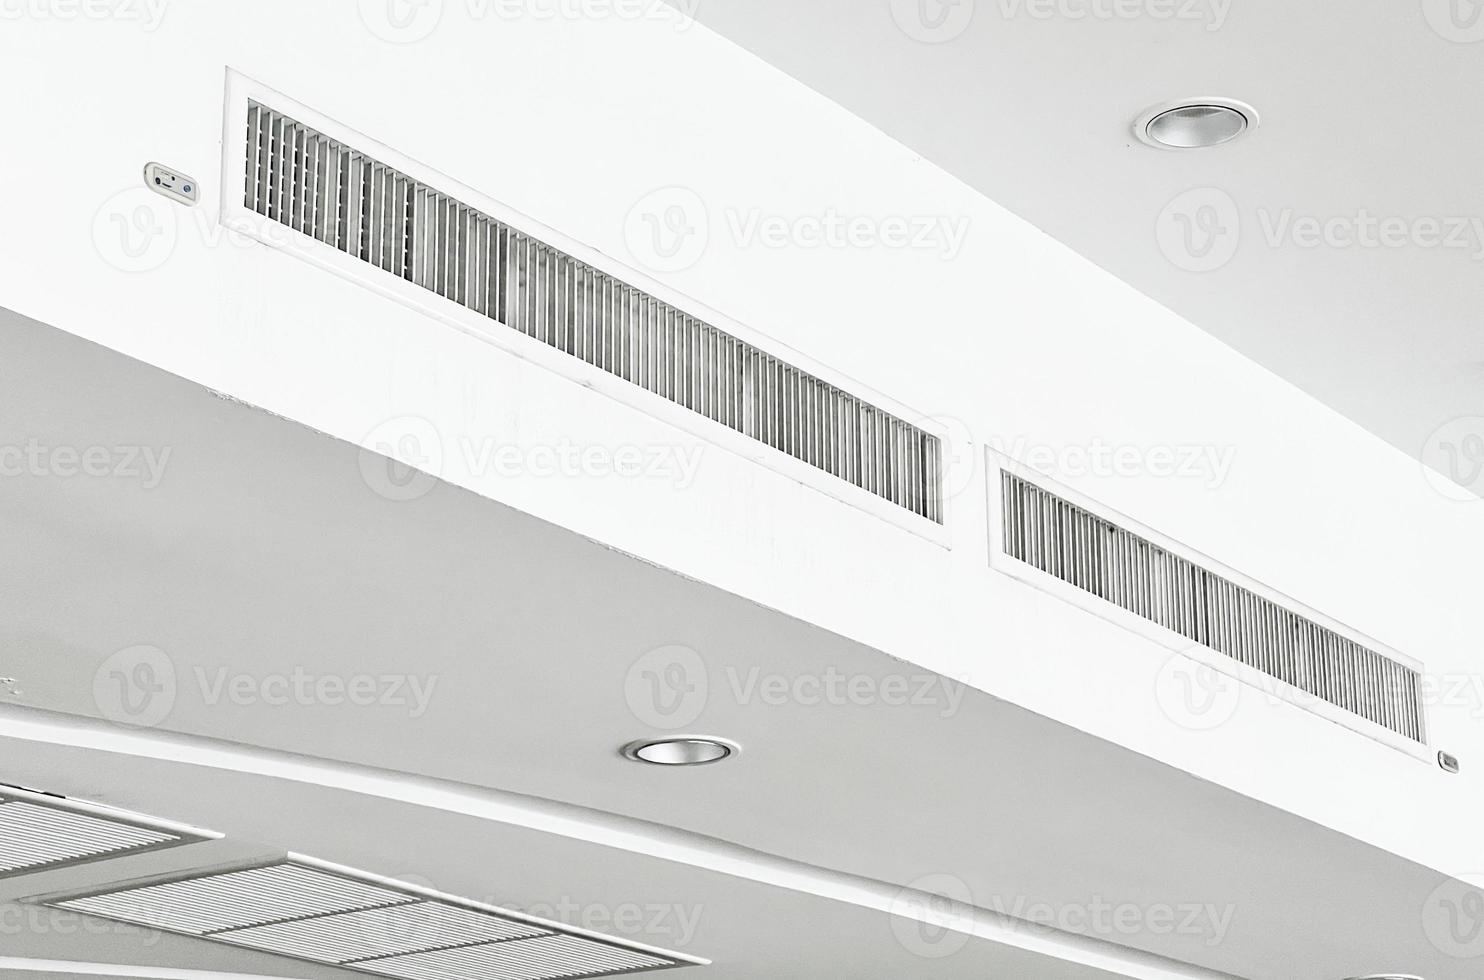 Ceiling mounted cassette type air conditioner and modern lamp light on white ceiling. duct air conditioner for home or office photo